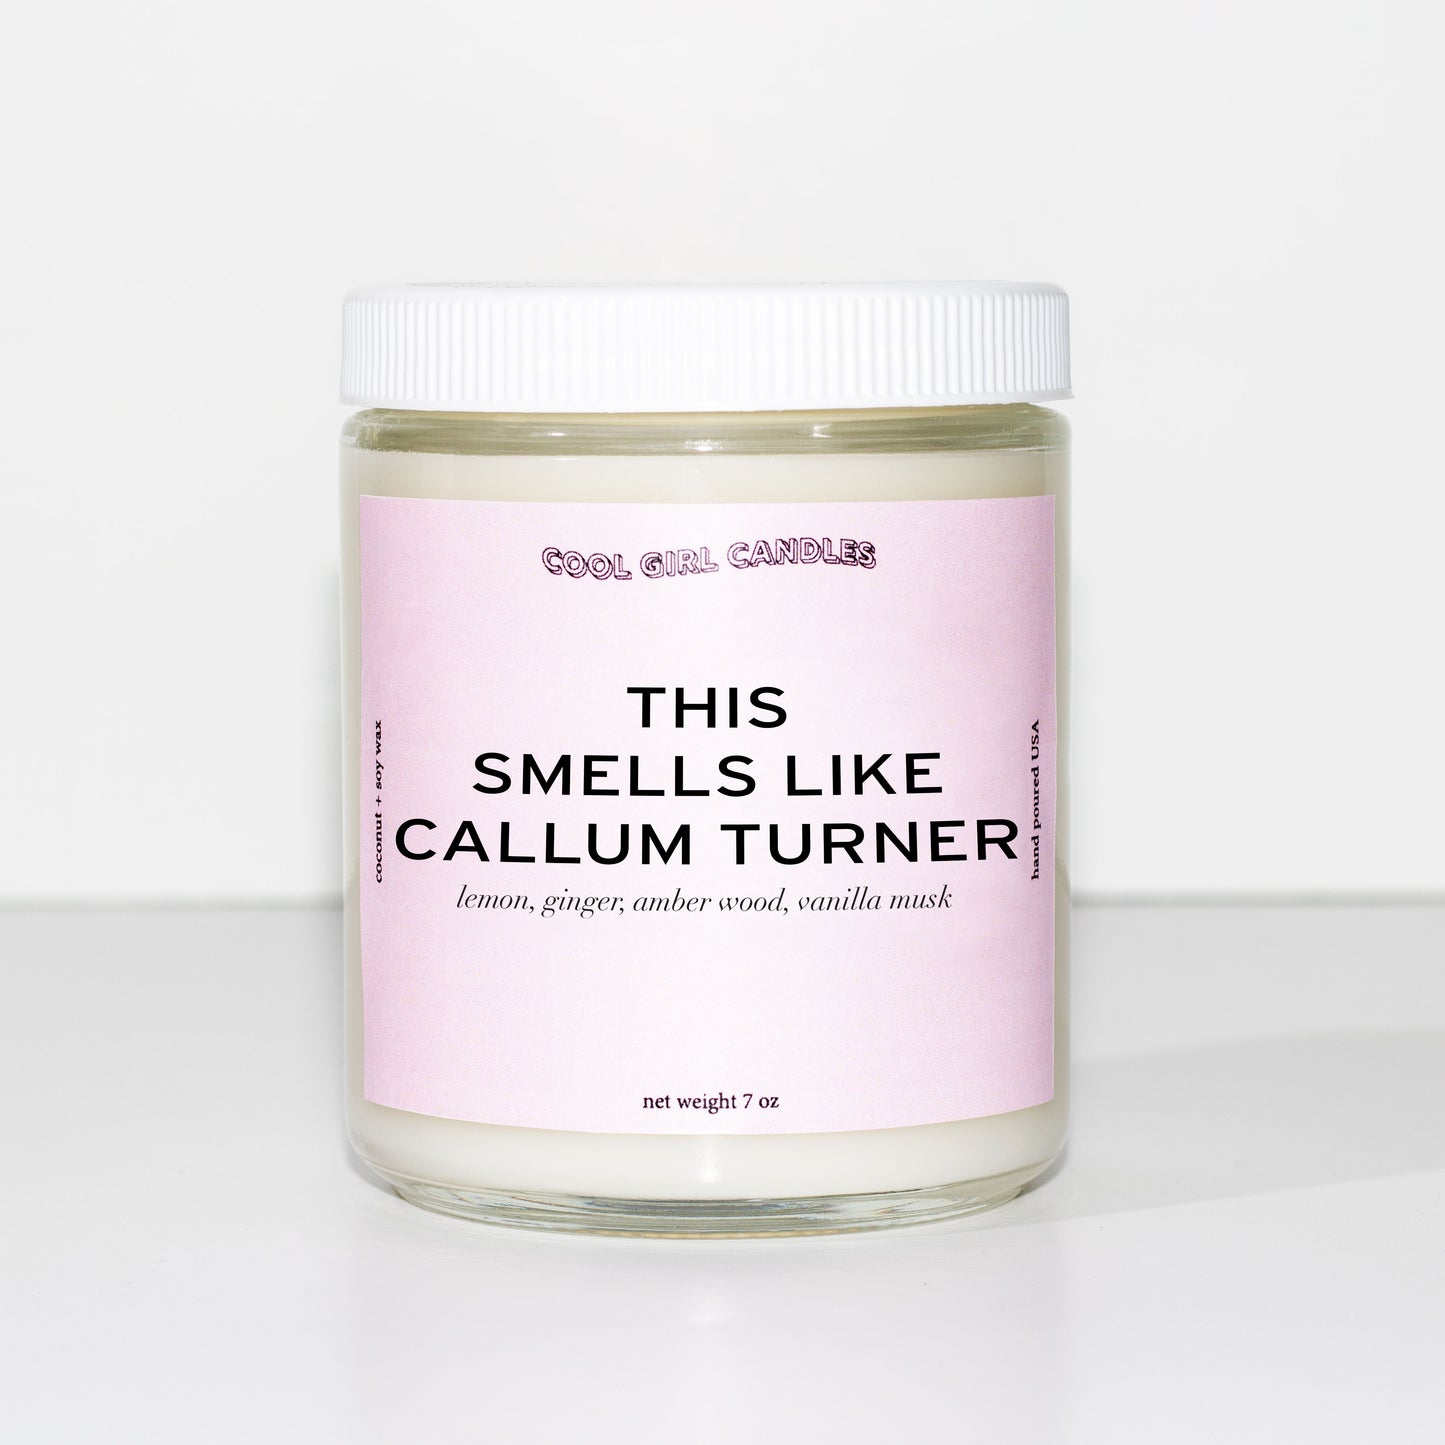 callum turner celebrity candle that smells like Callum turner by cool girl candles with notes of lemon, ginger, amber wood and vanilla musk